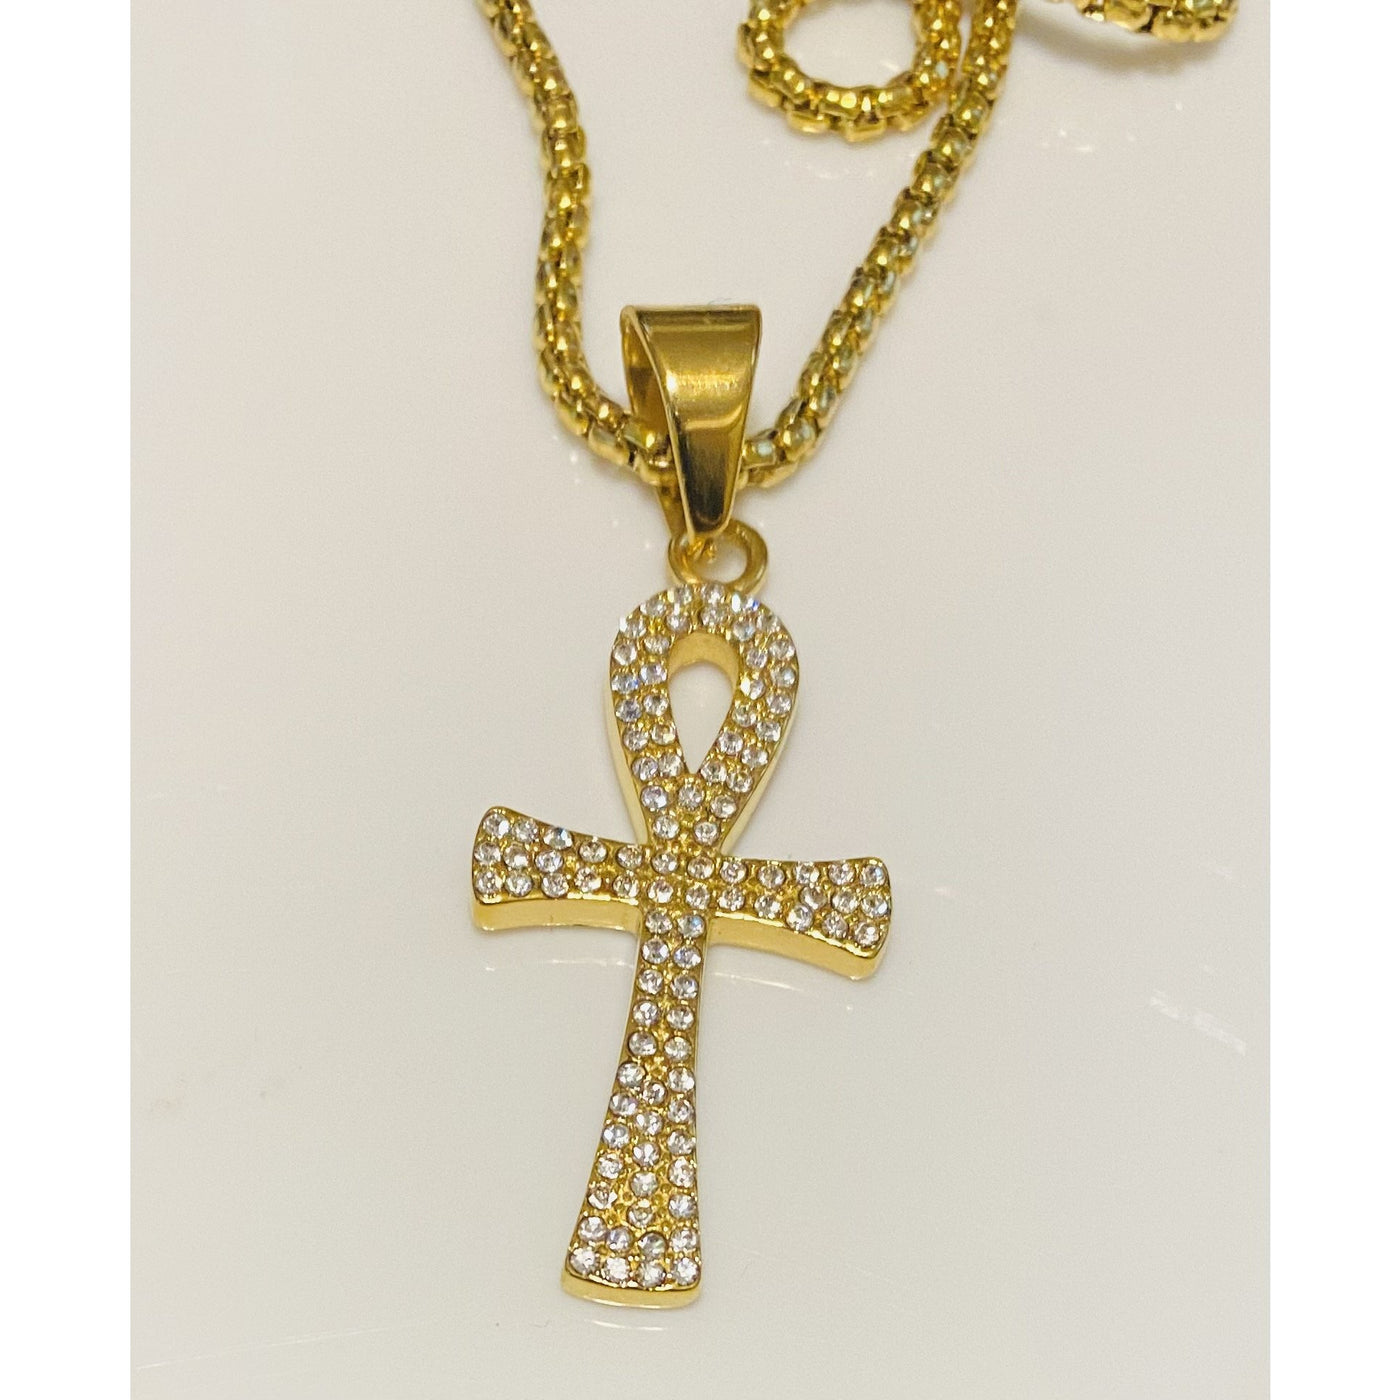 Ankh Necklace Gold plated 22 inches